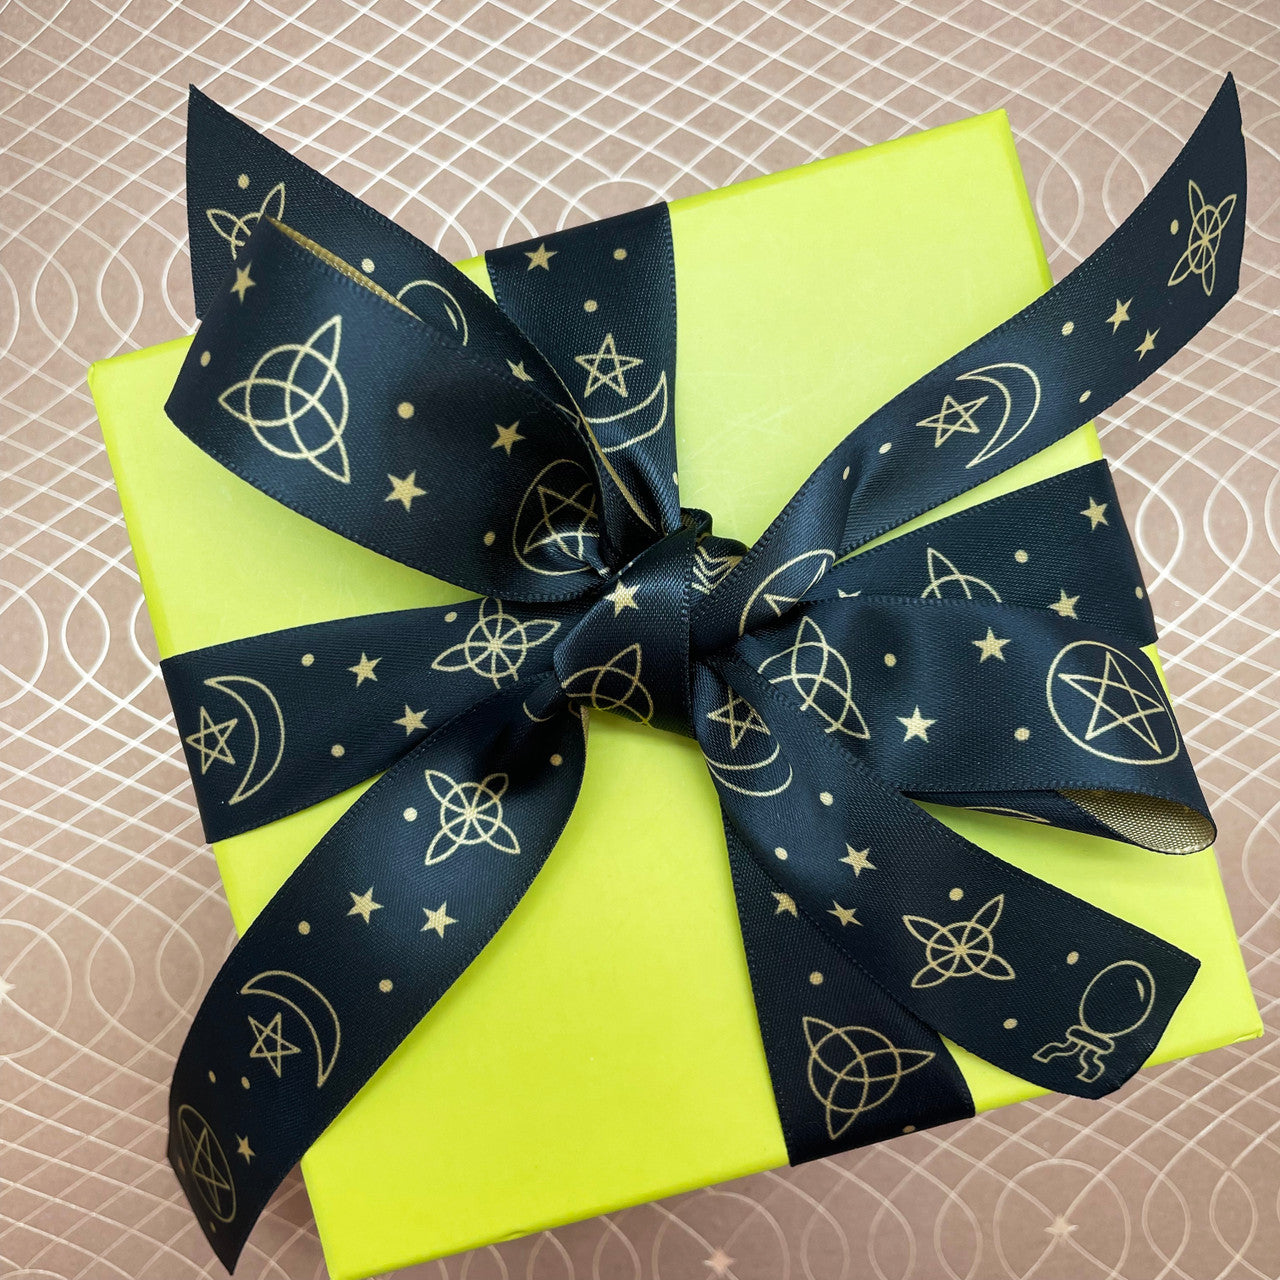 Tie a pretty bow on a gift for anyone who is interested in the mystical!